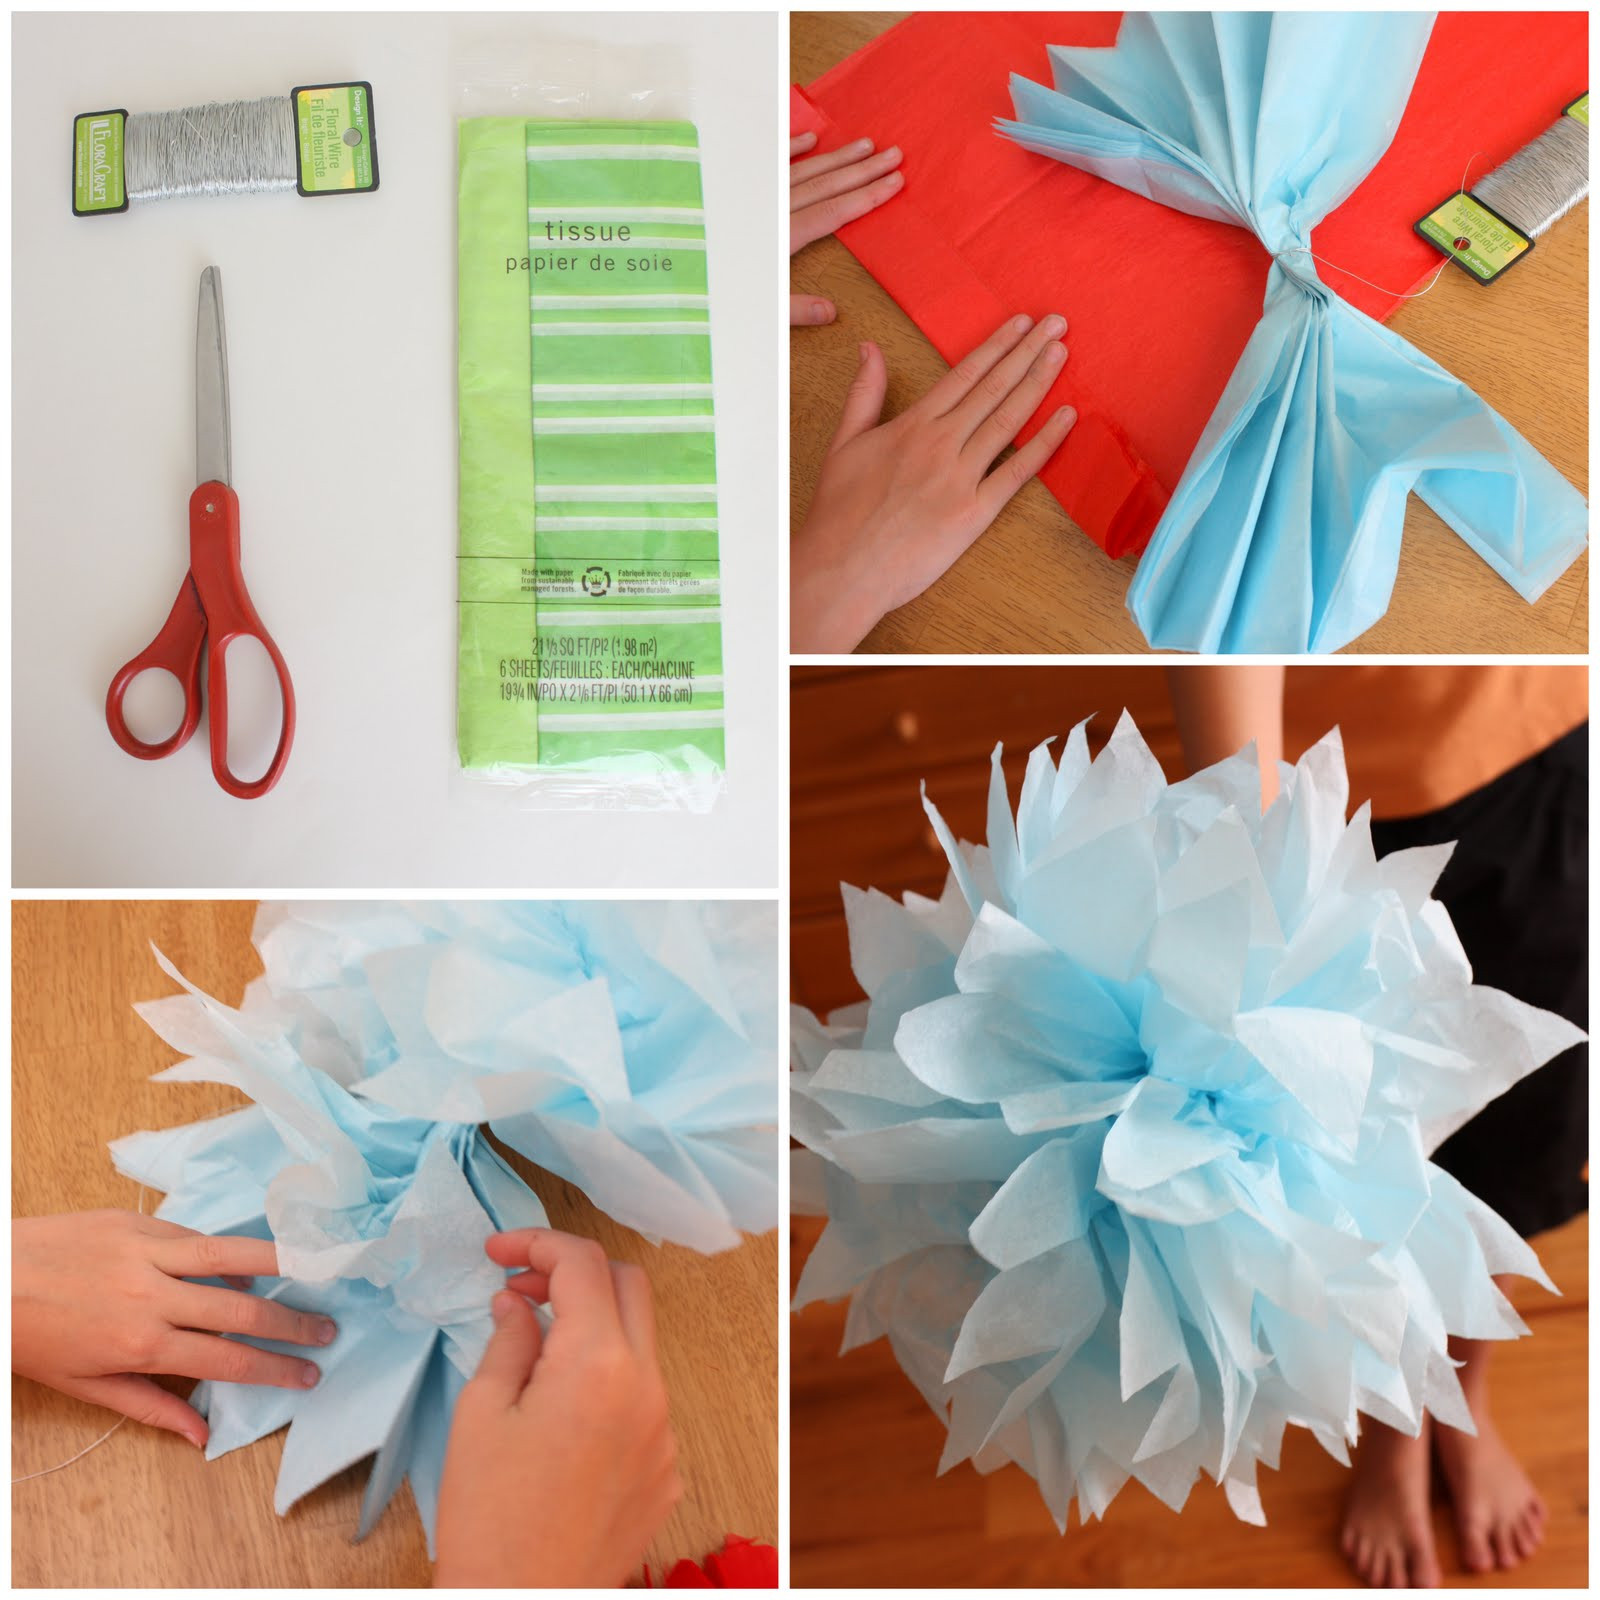 Easy Paper Crafts For Adults
 Tissue Paper Crafts For Adults Paper Crafts Ideas for Kids